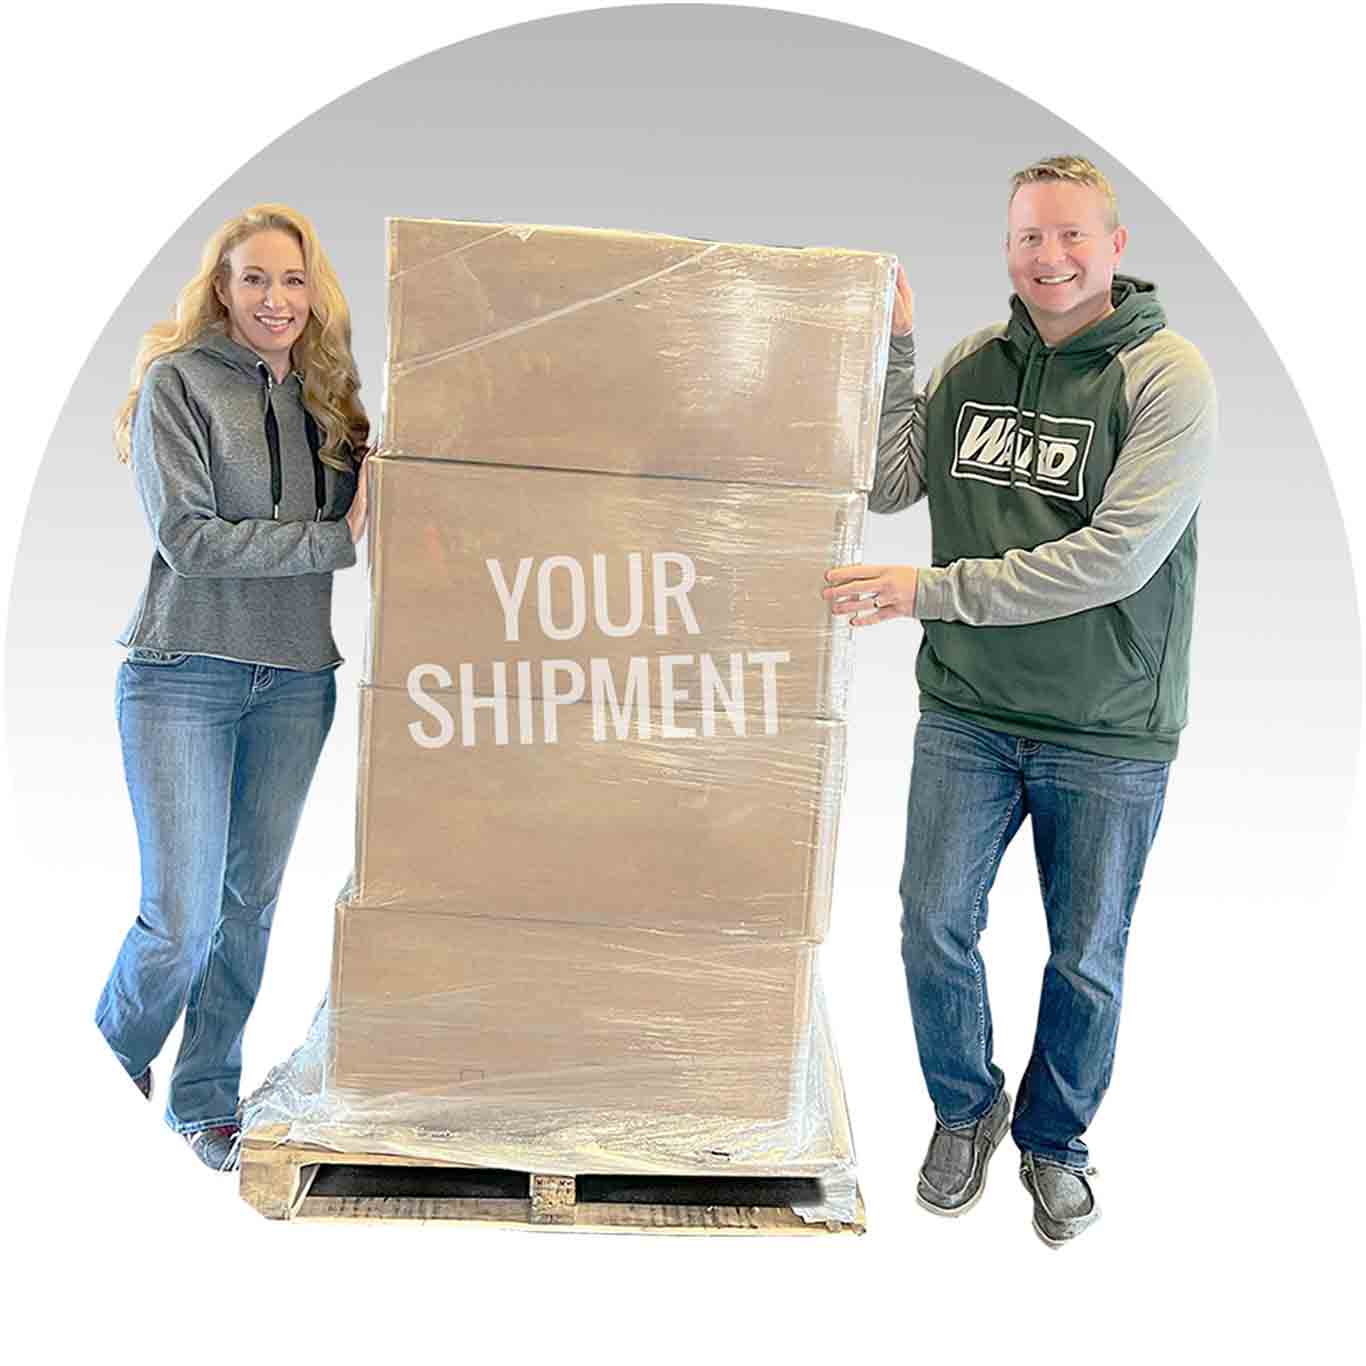 Ward Chicago associates offer brokerage services for your shipment